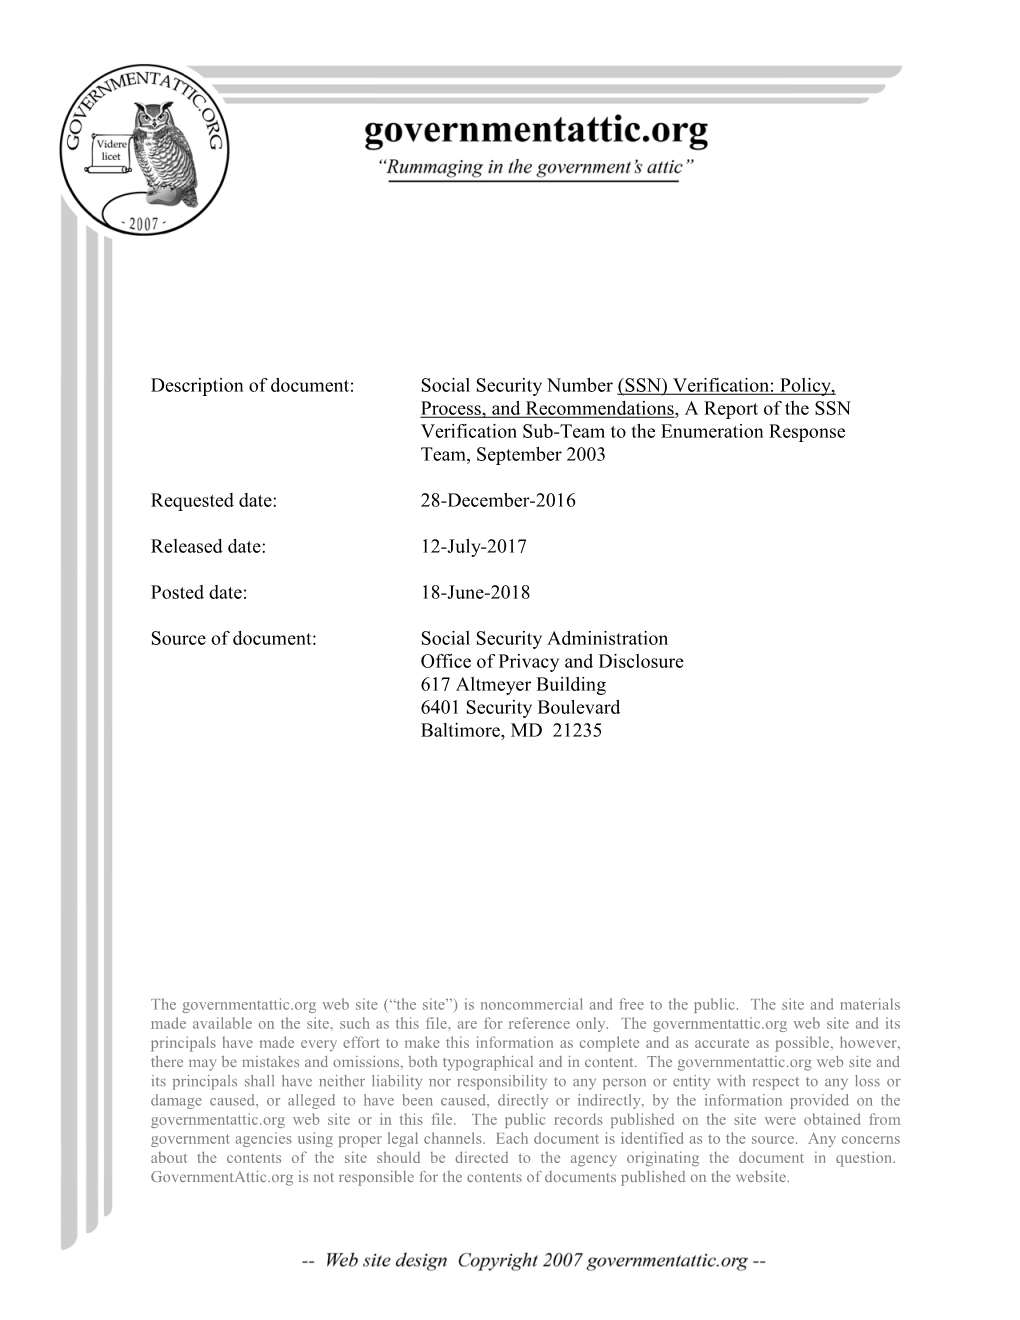 (SSN) Verification: Policy, Process, and Recommendations, a Report of the SSN Verification Sub-Team to the Enumeration Response Team, September 2003